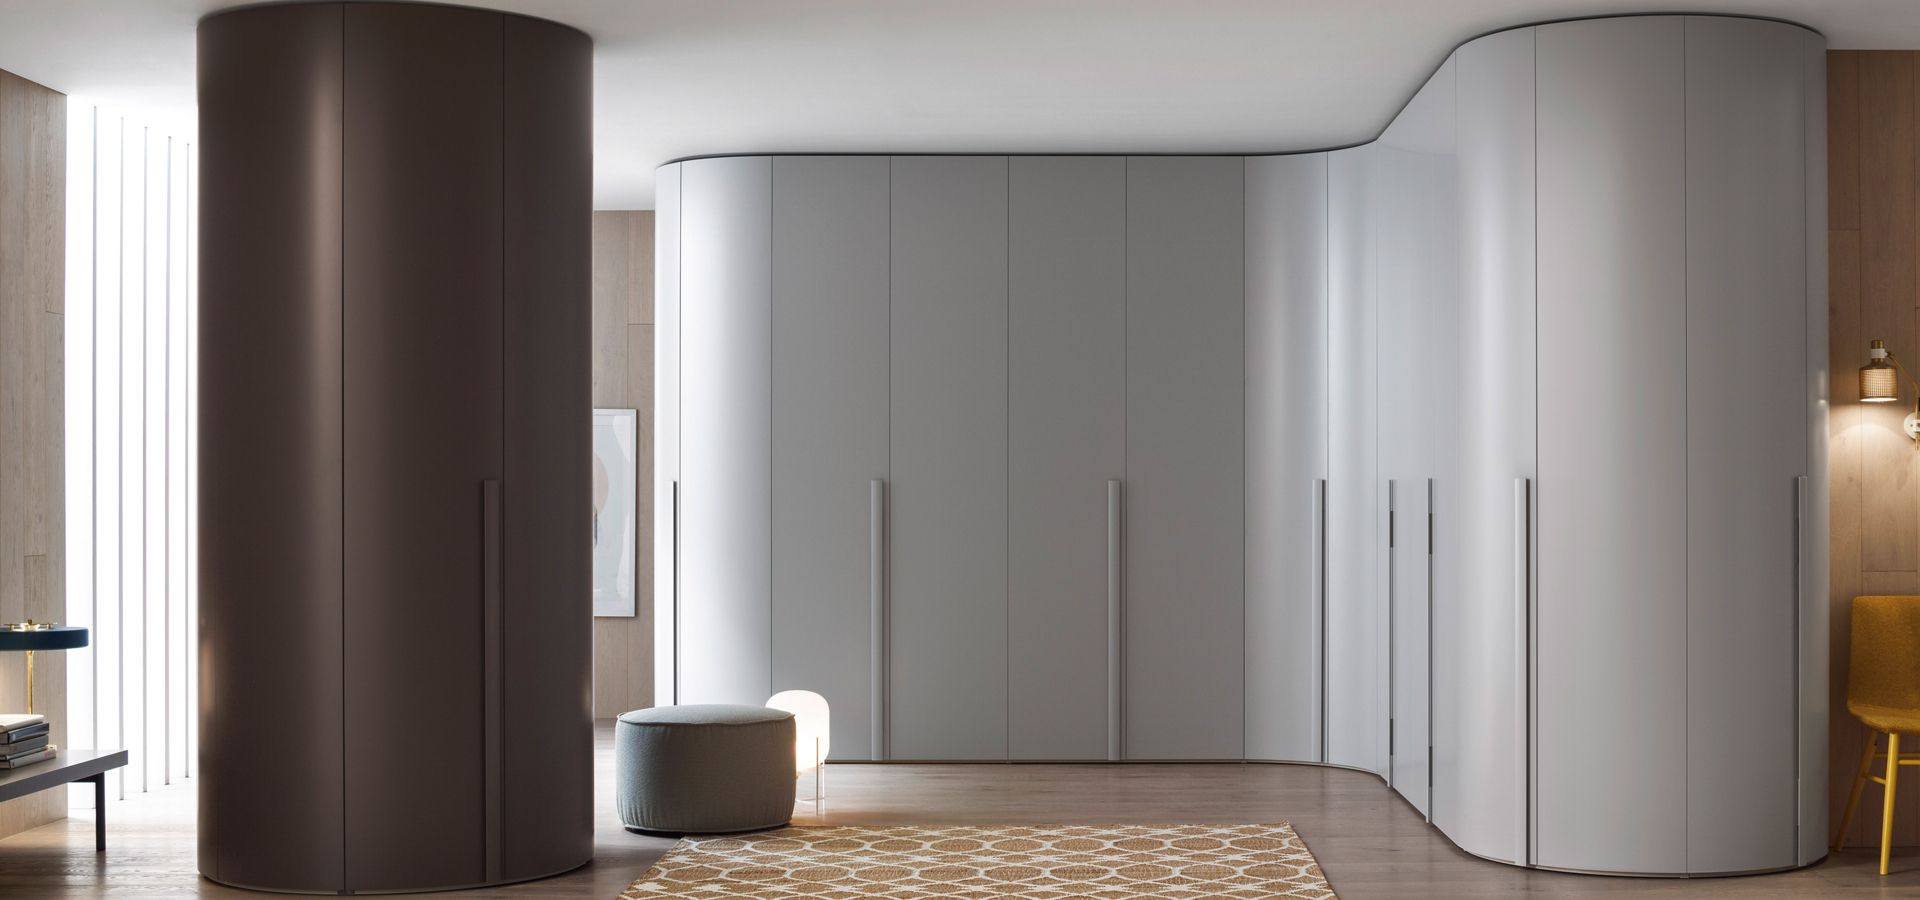 Alfa Curve – Fitted Bedroom Furniture | Wardrobes Uk | Lawrence Walsh  Furniture Within Curved Wardrobes Doors (View 18 of 20)